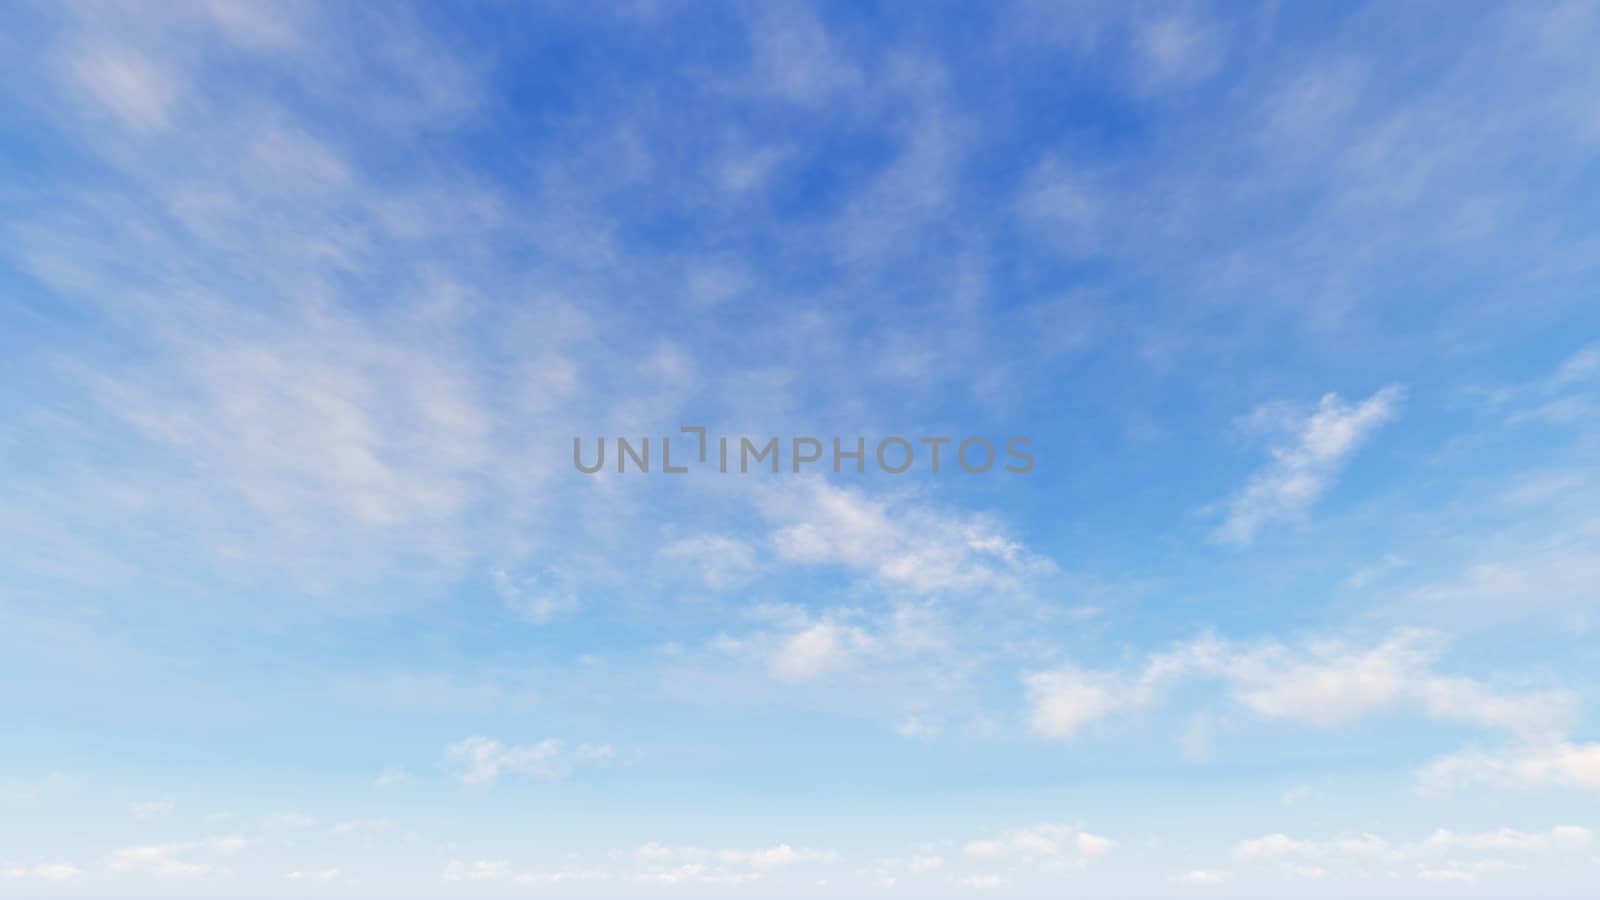 Cloudy blue sky abstract background, blue sky background with tiny clouds, 3d rendering

